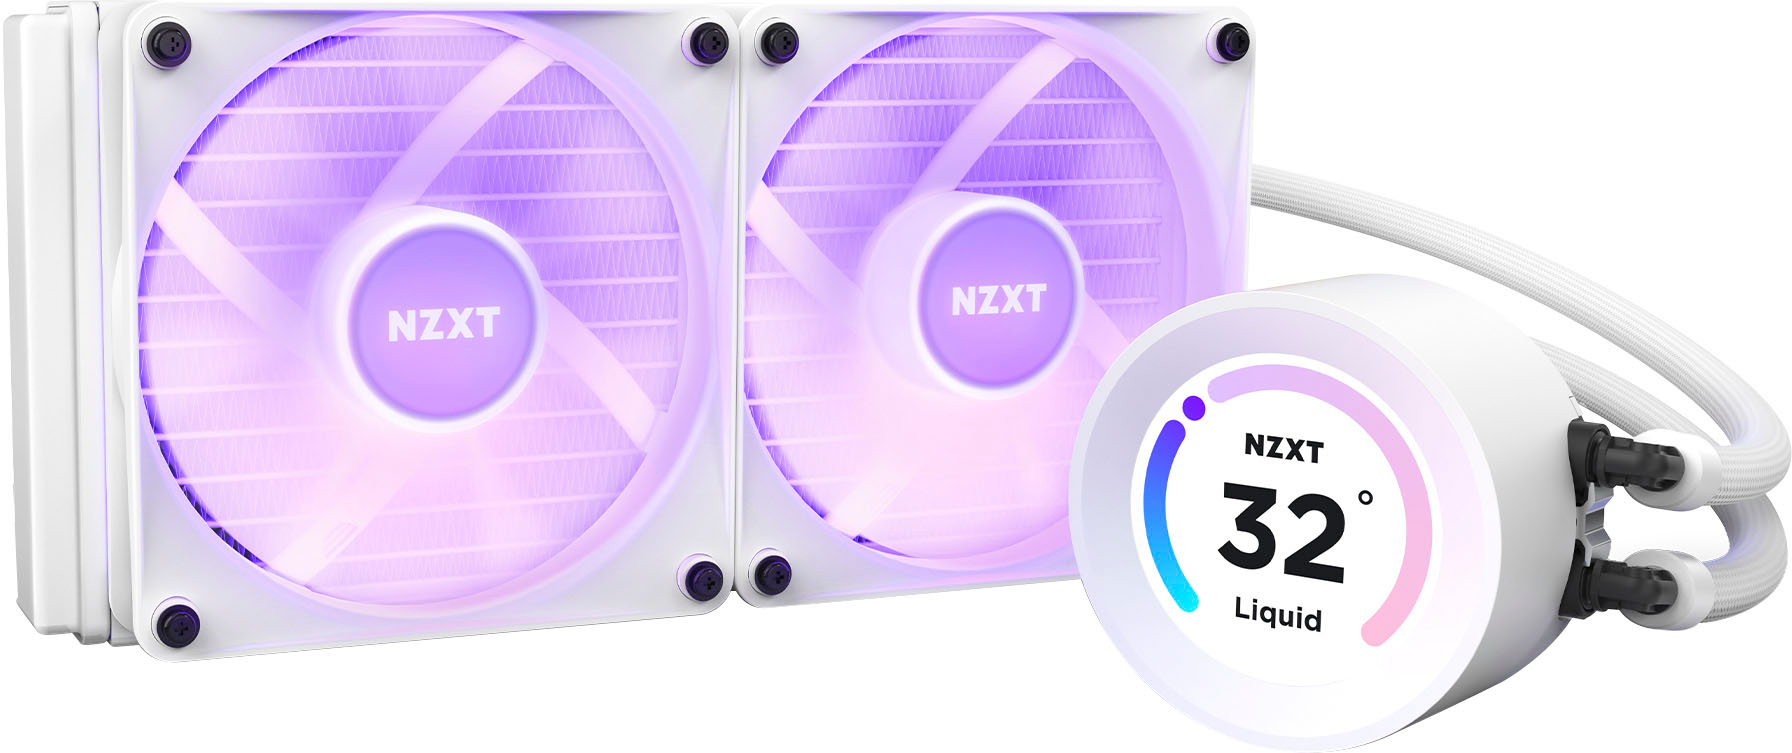 Liquid Buy NZXT AIO Fans RGB System display 120mm 240mm LCD Kraken with RL-KR24E-W1 Fans + Best Cooling Radiator - wide-angle Elite White and 2.36\